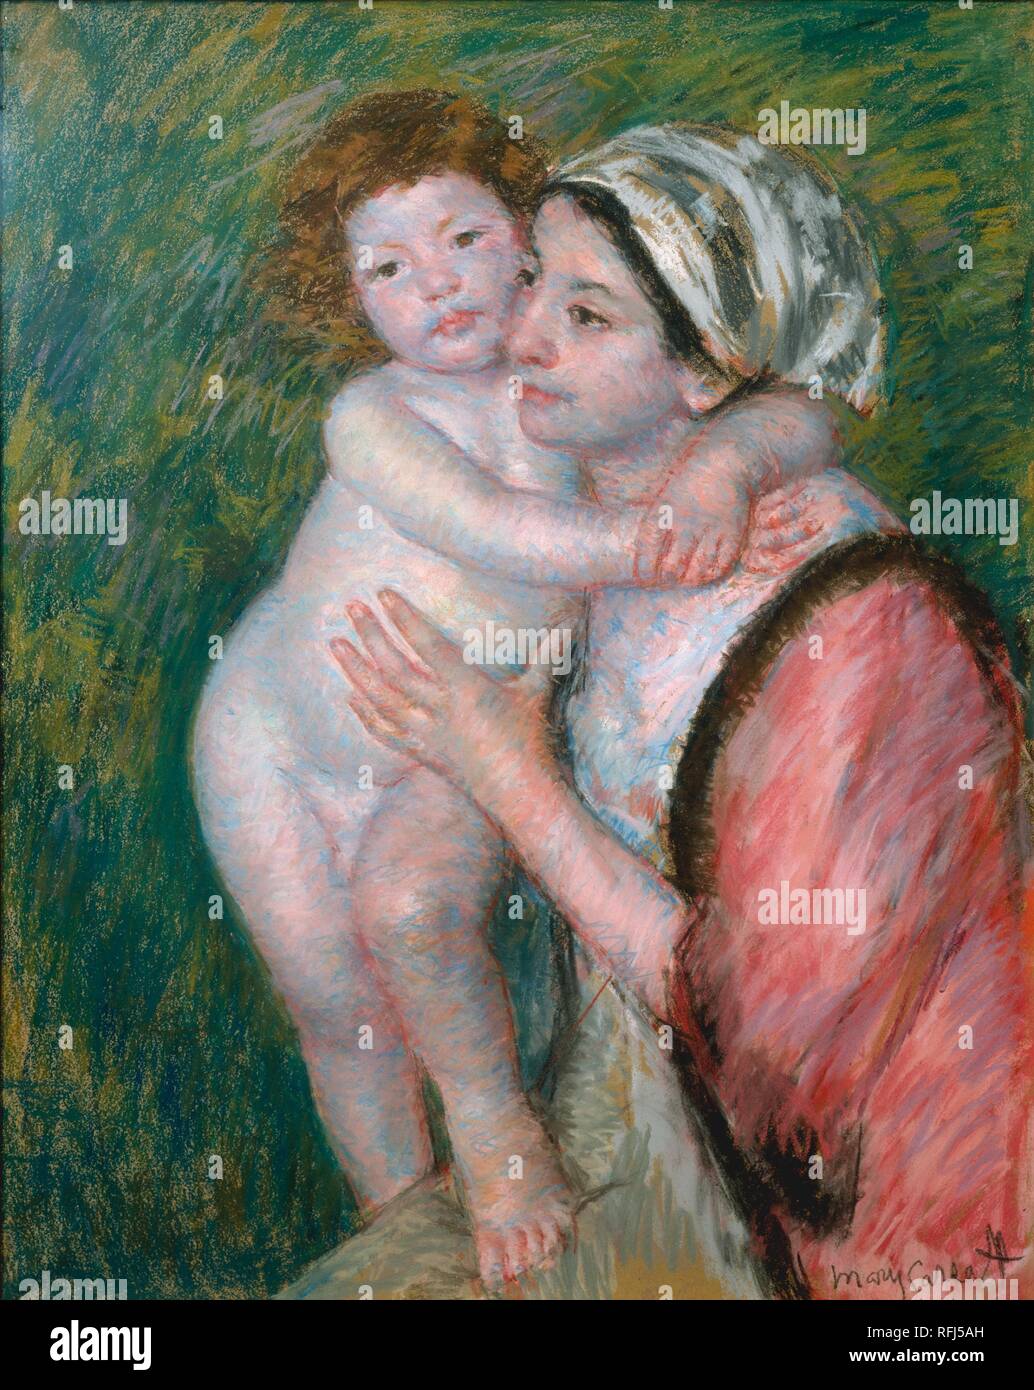 Mother and Child. Artist: Mary Cassatt (American, Pittsburgh, Pennsylvania 1844-1926 Le Mesnil-Théribus, Oise). Dimensions: 32 x 25 5/8 in. (81.3 x 65.1 cm). Date: 1914. Museum: Metropolitan Museum of Art, New York, USA. Stock Photo